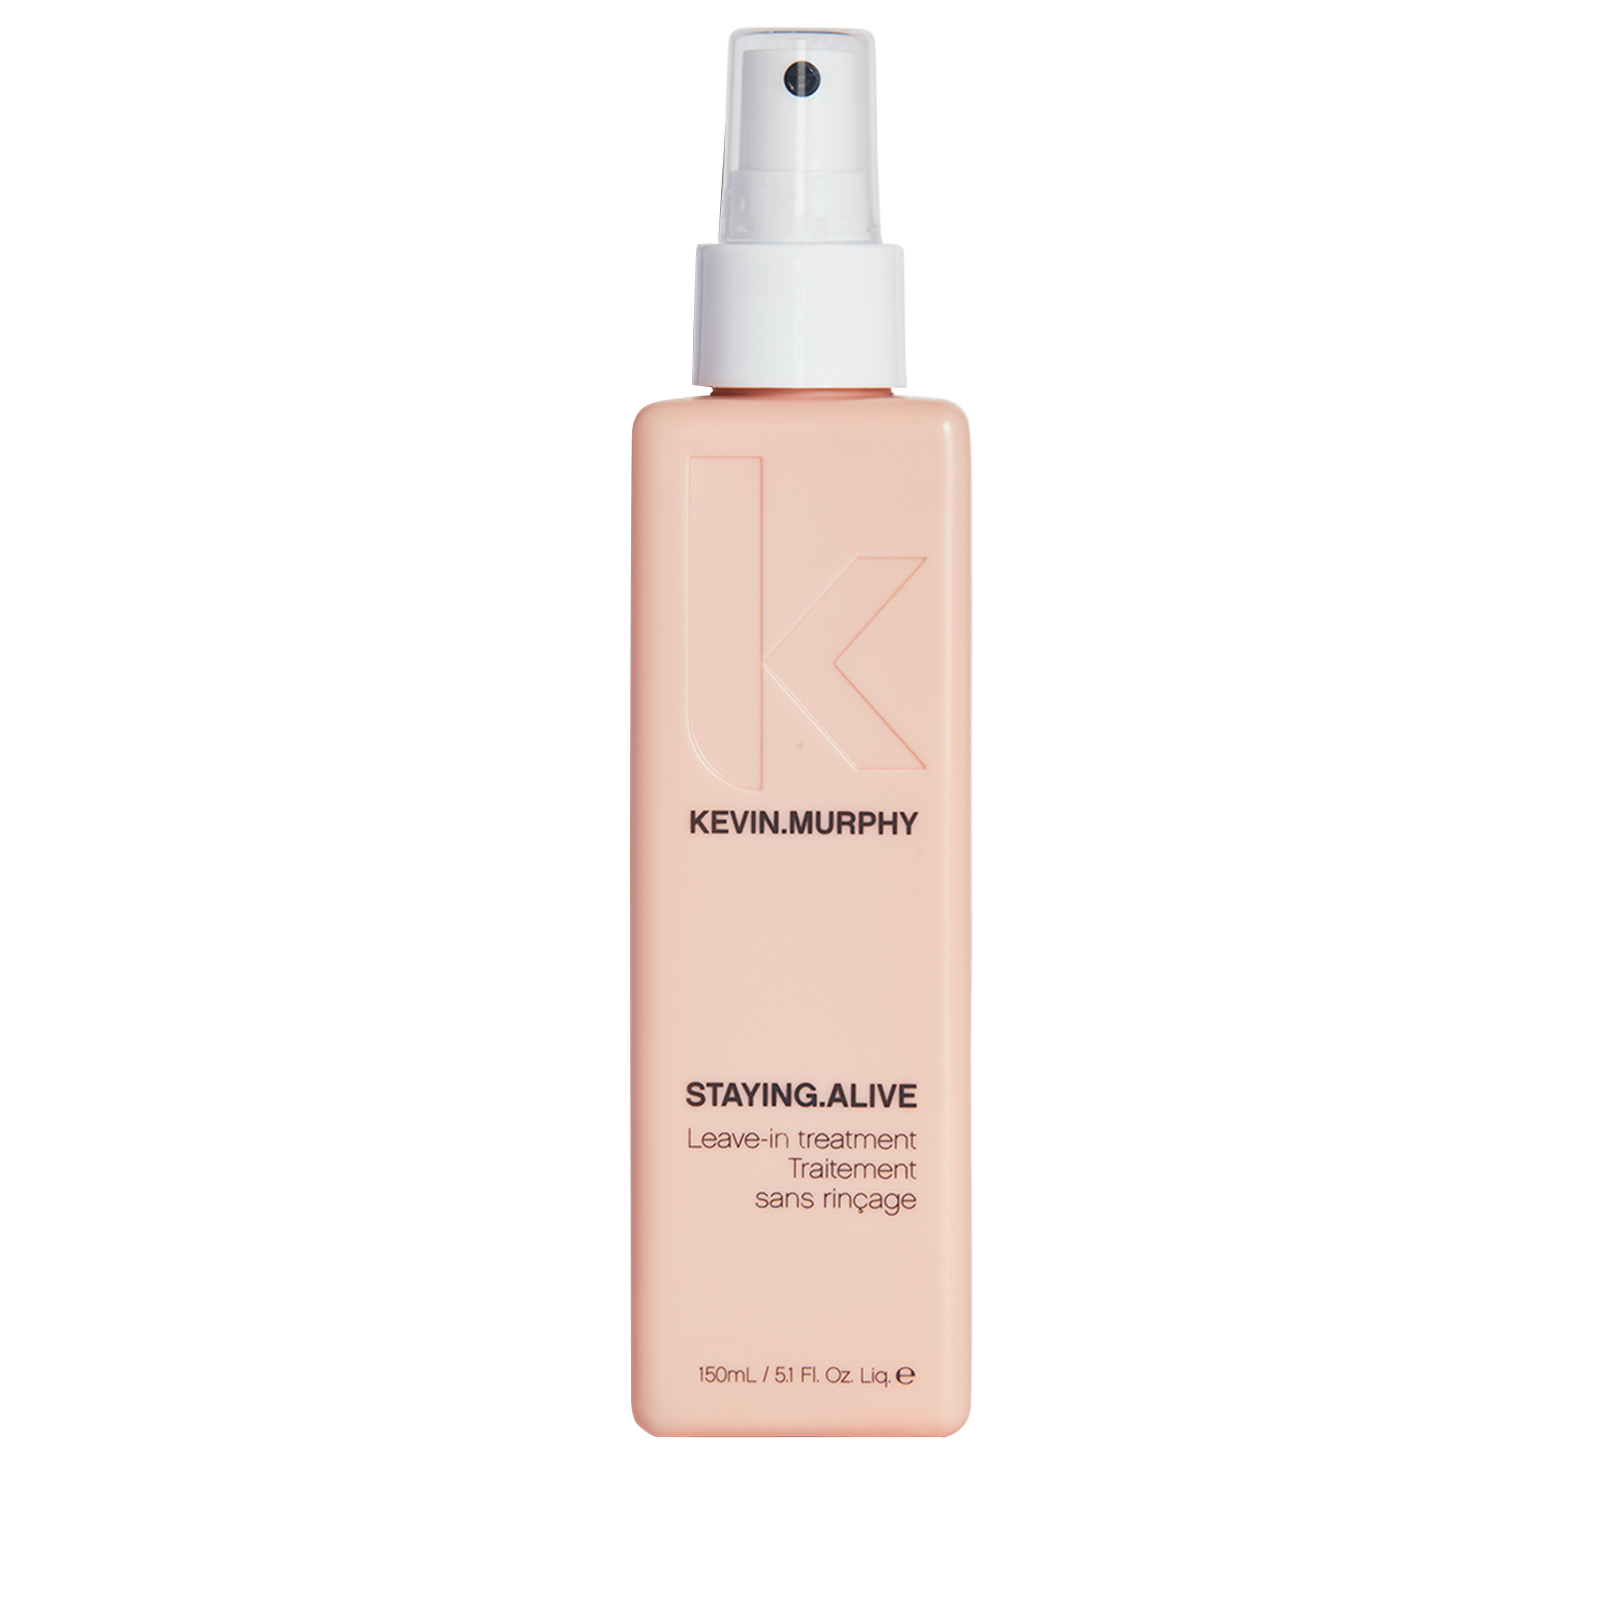 Kevin Murphy Staying Alive- Leave-in tratament de reparare 150ml haircare.ro imagine noua